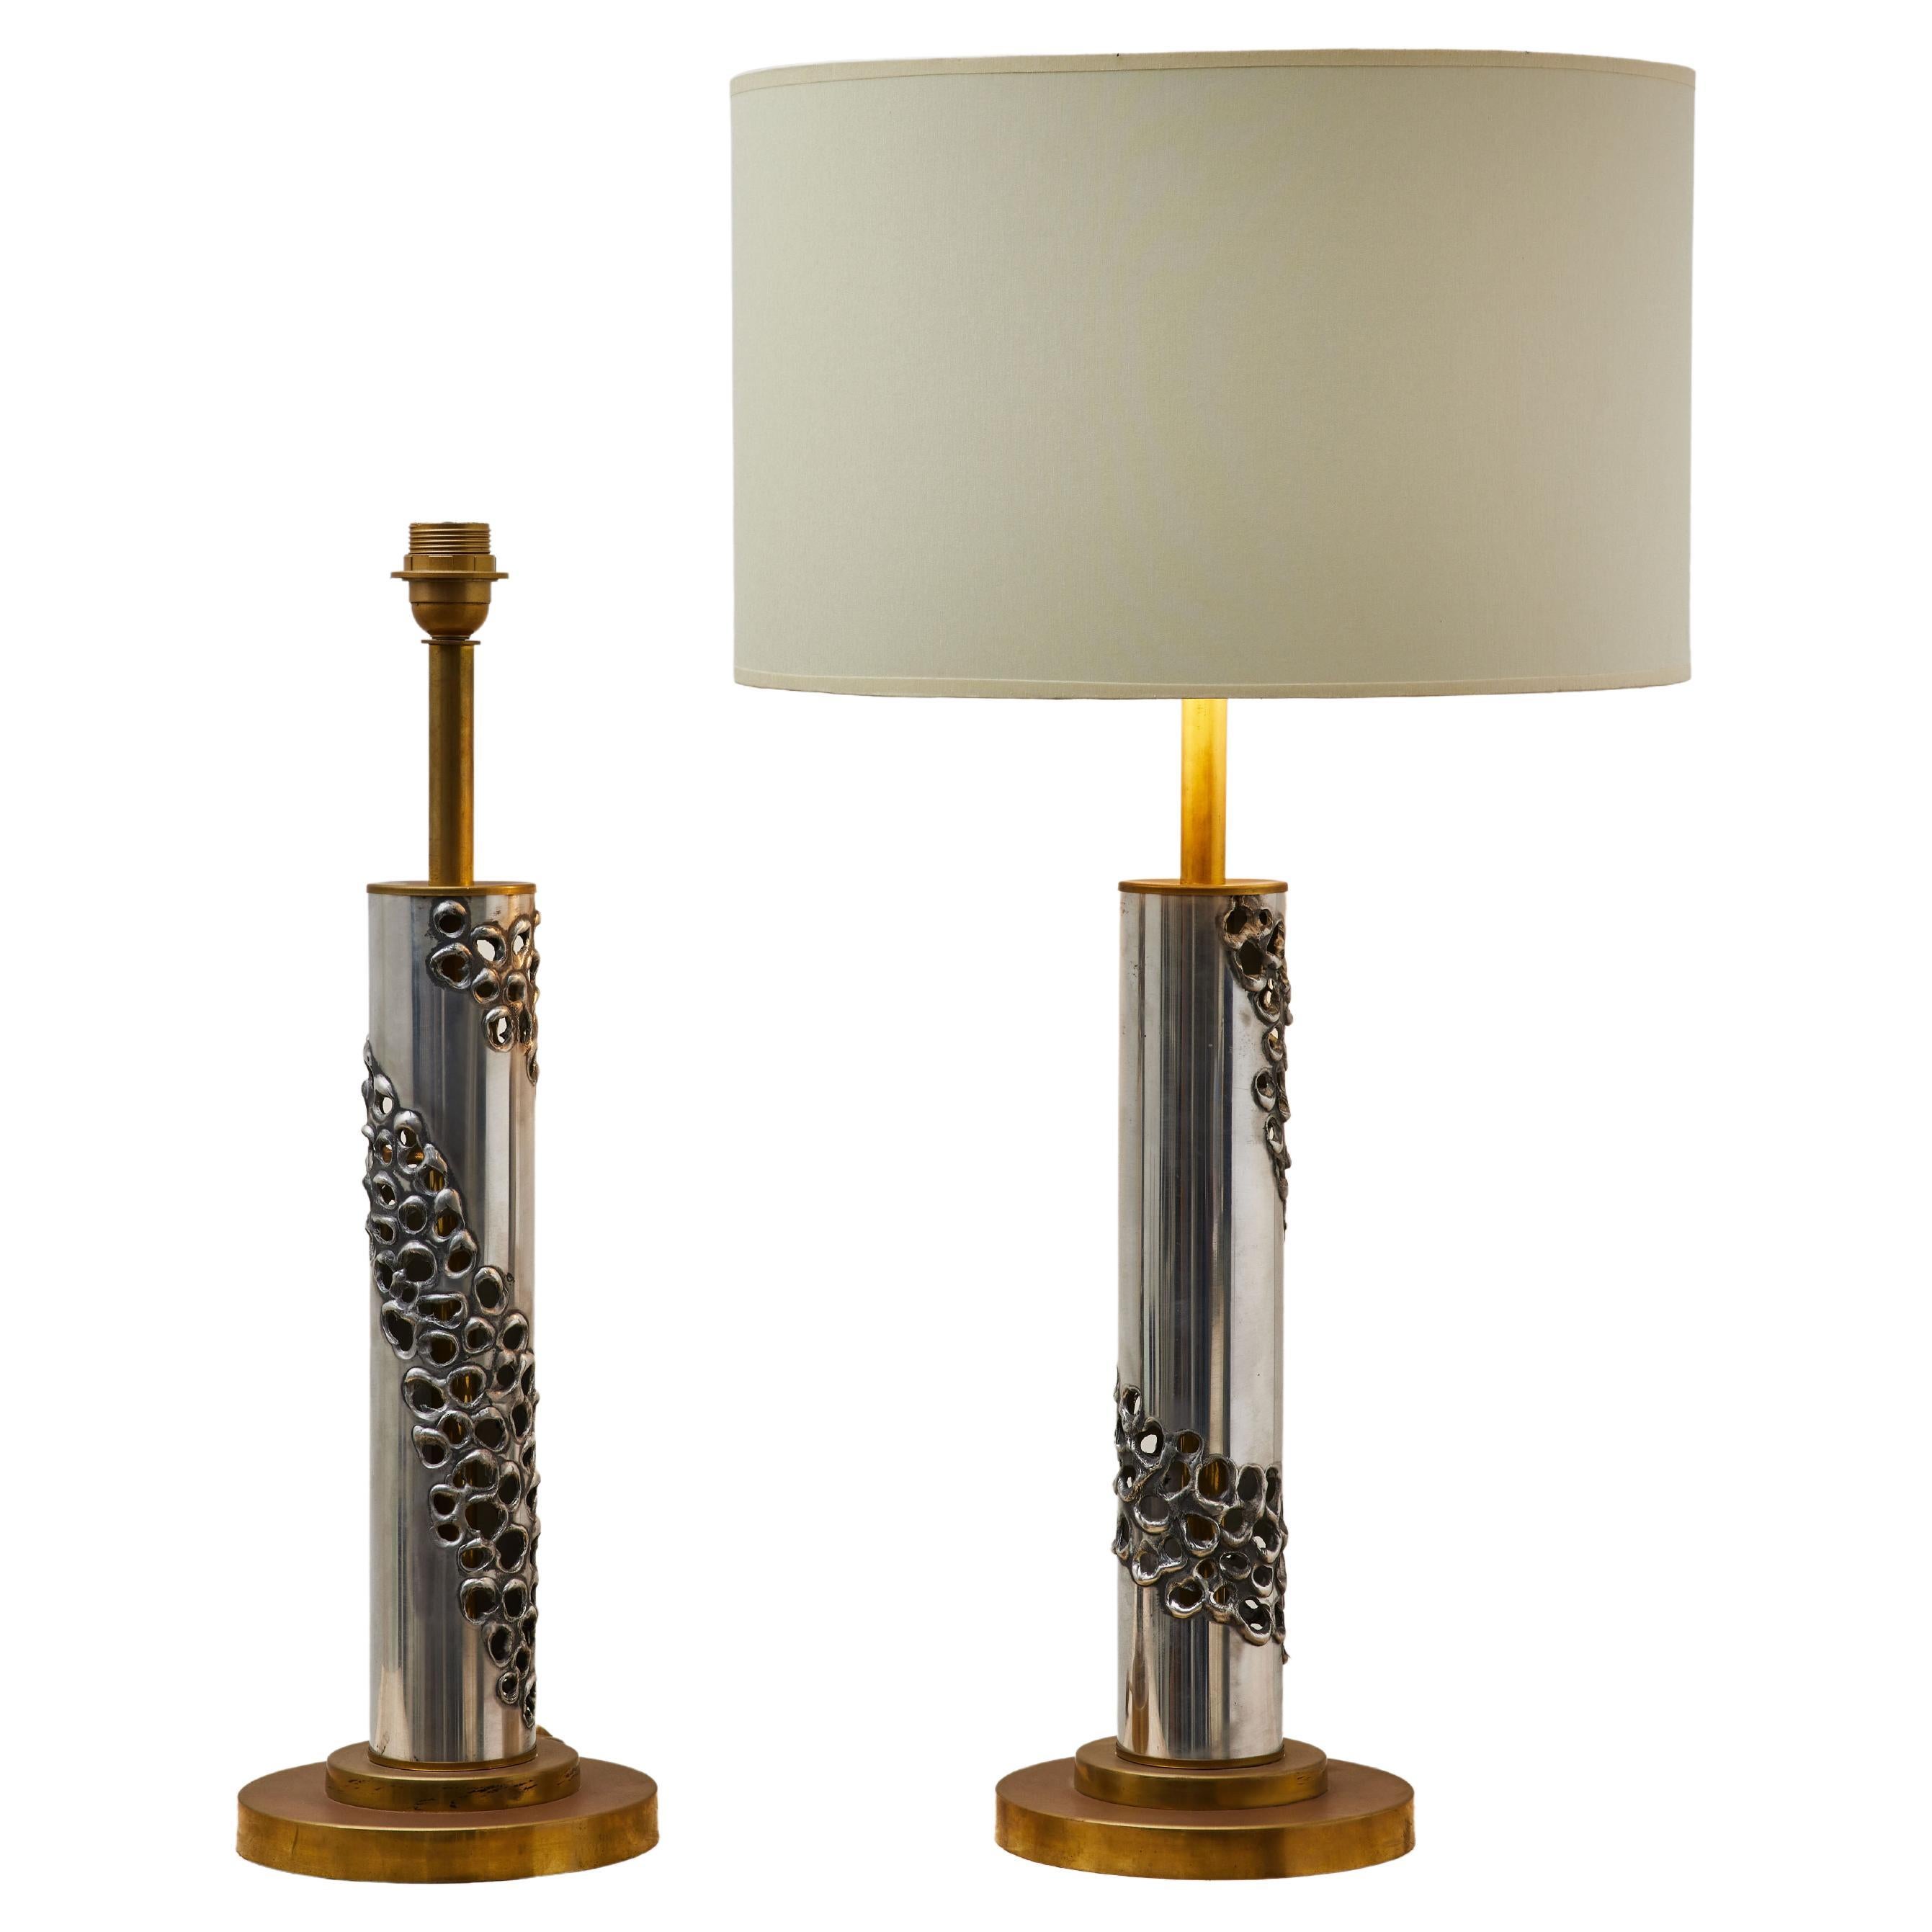 Vintage table lamps At Cost Price